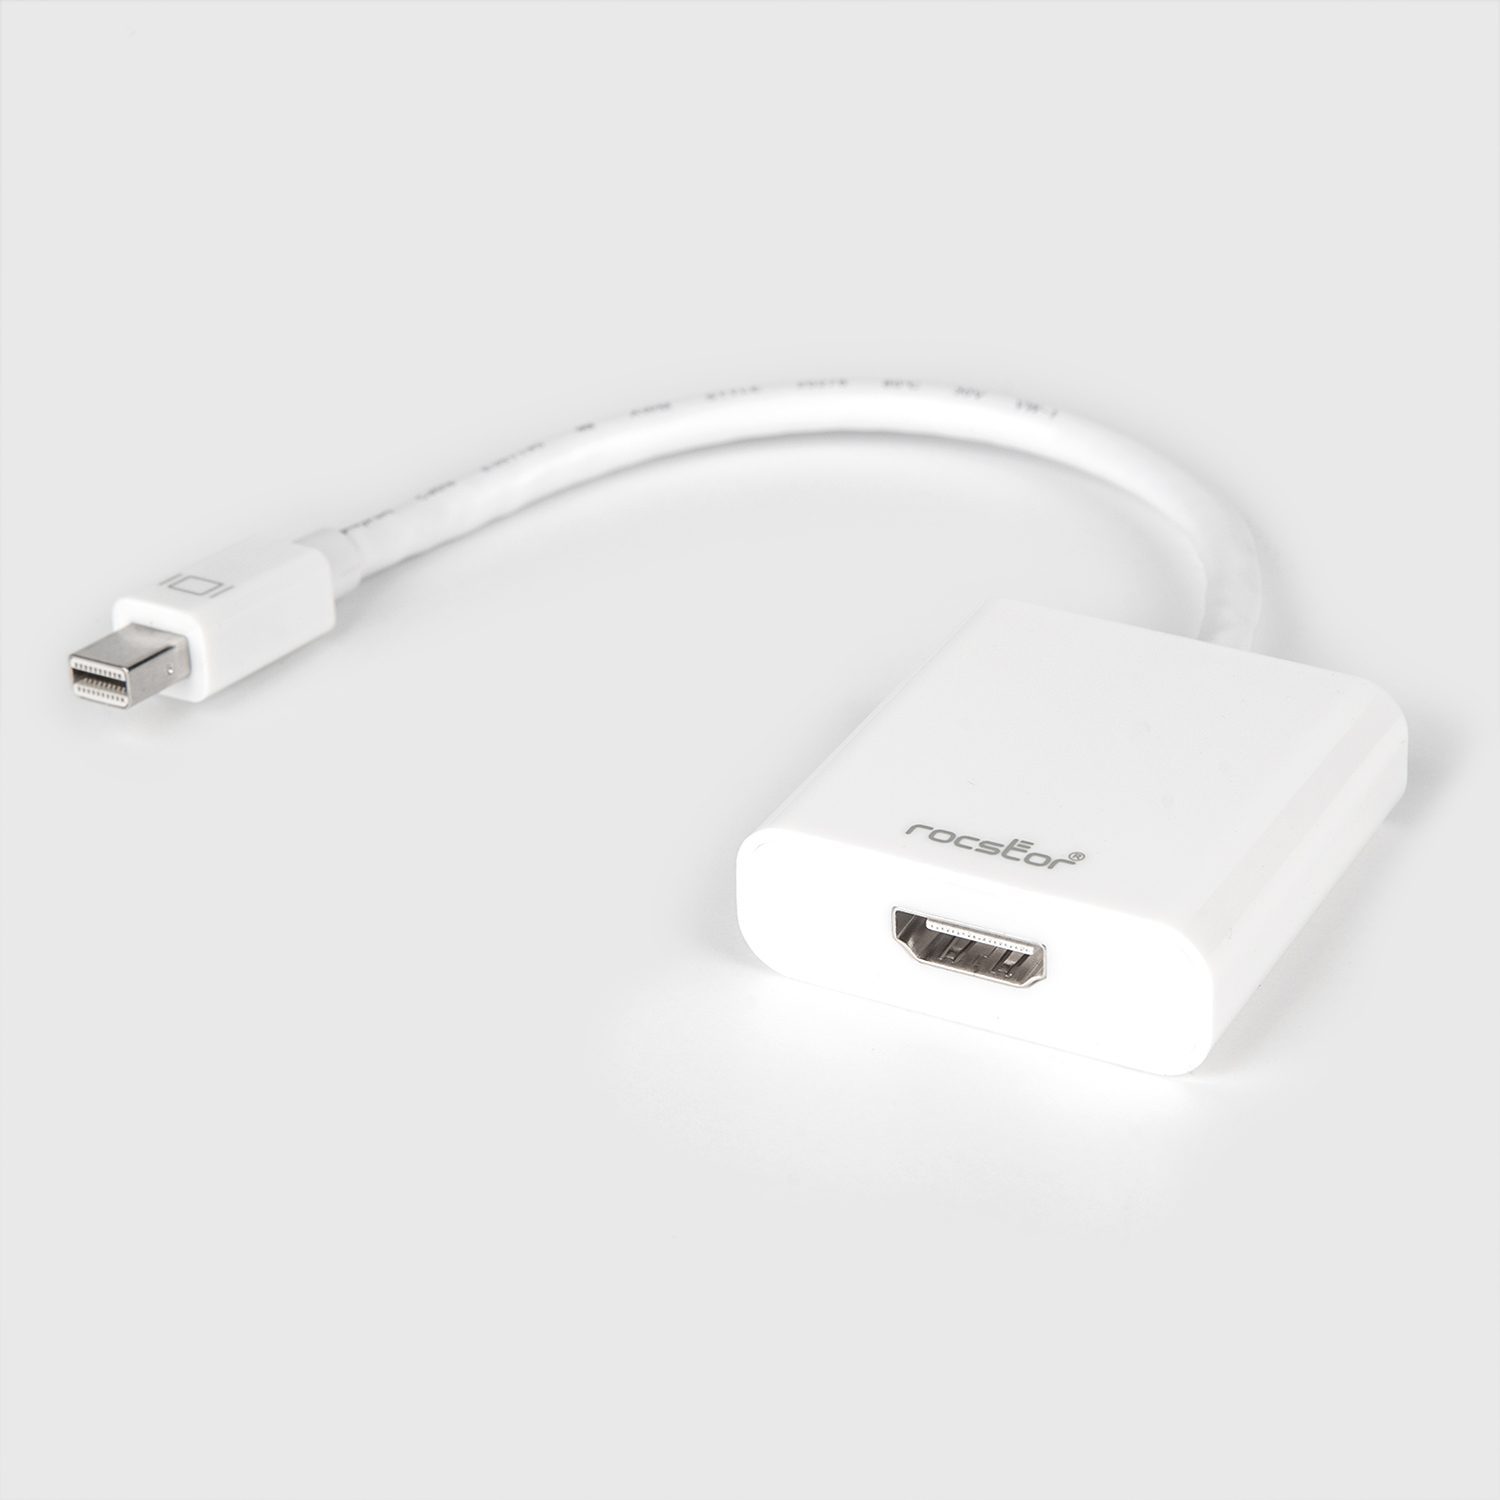 to HDMI Video Adapter - White